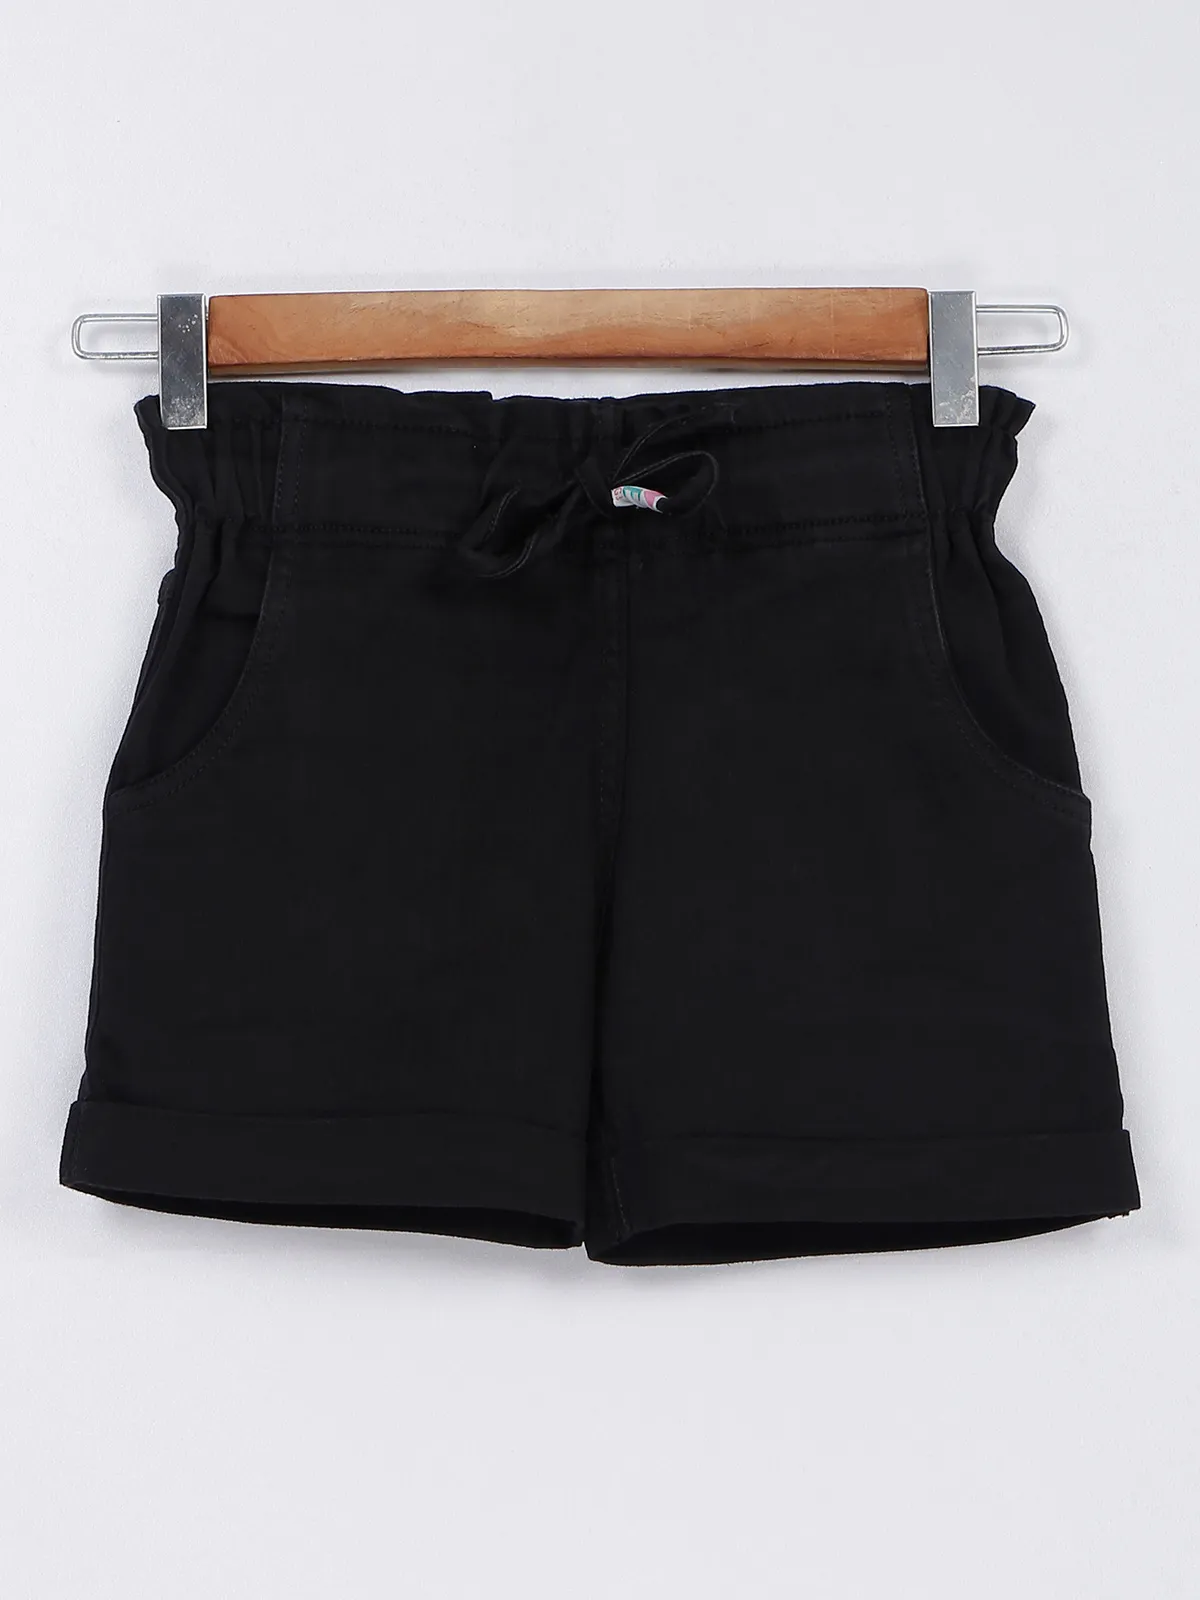 Just Clothes black denim shorts for casual